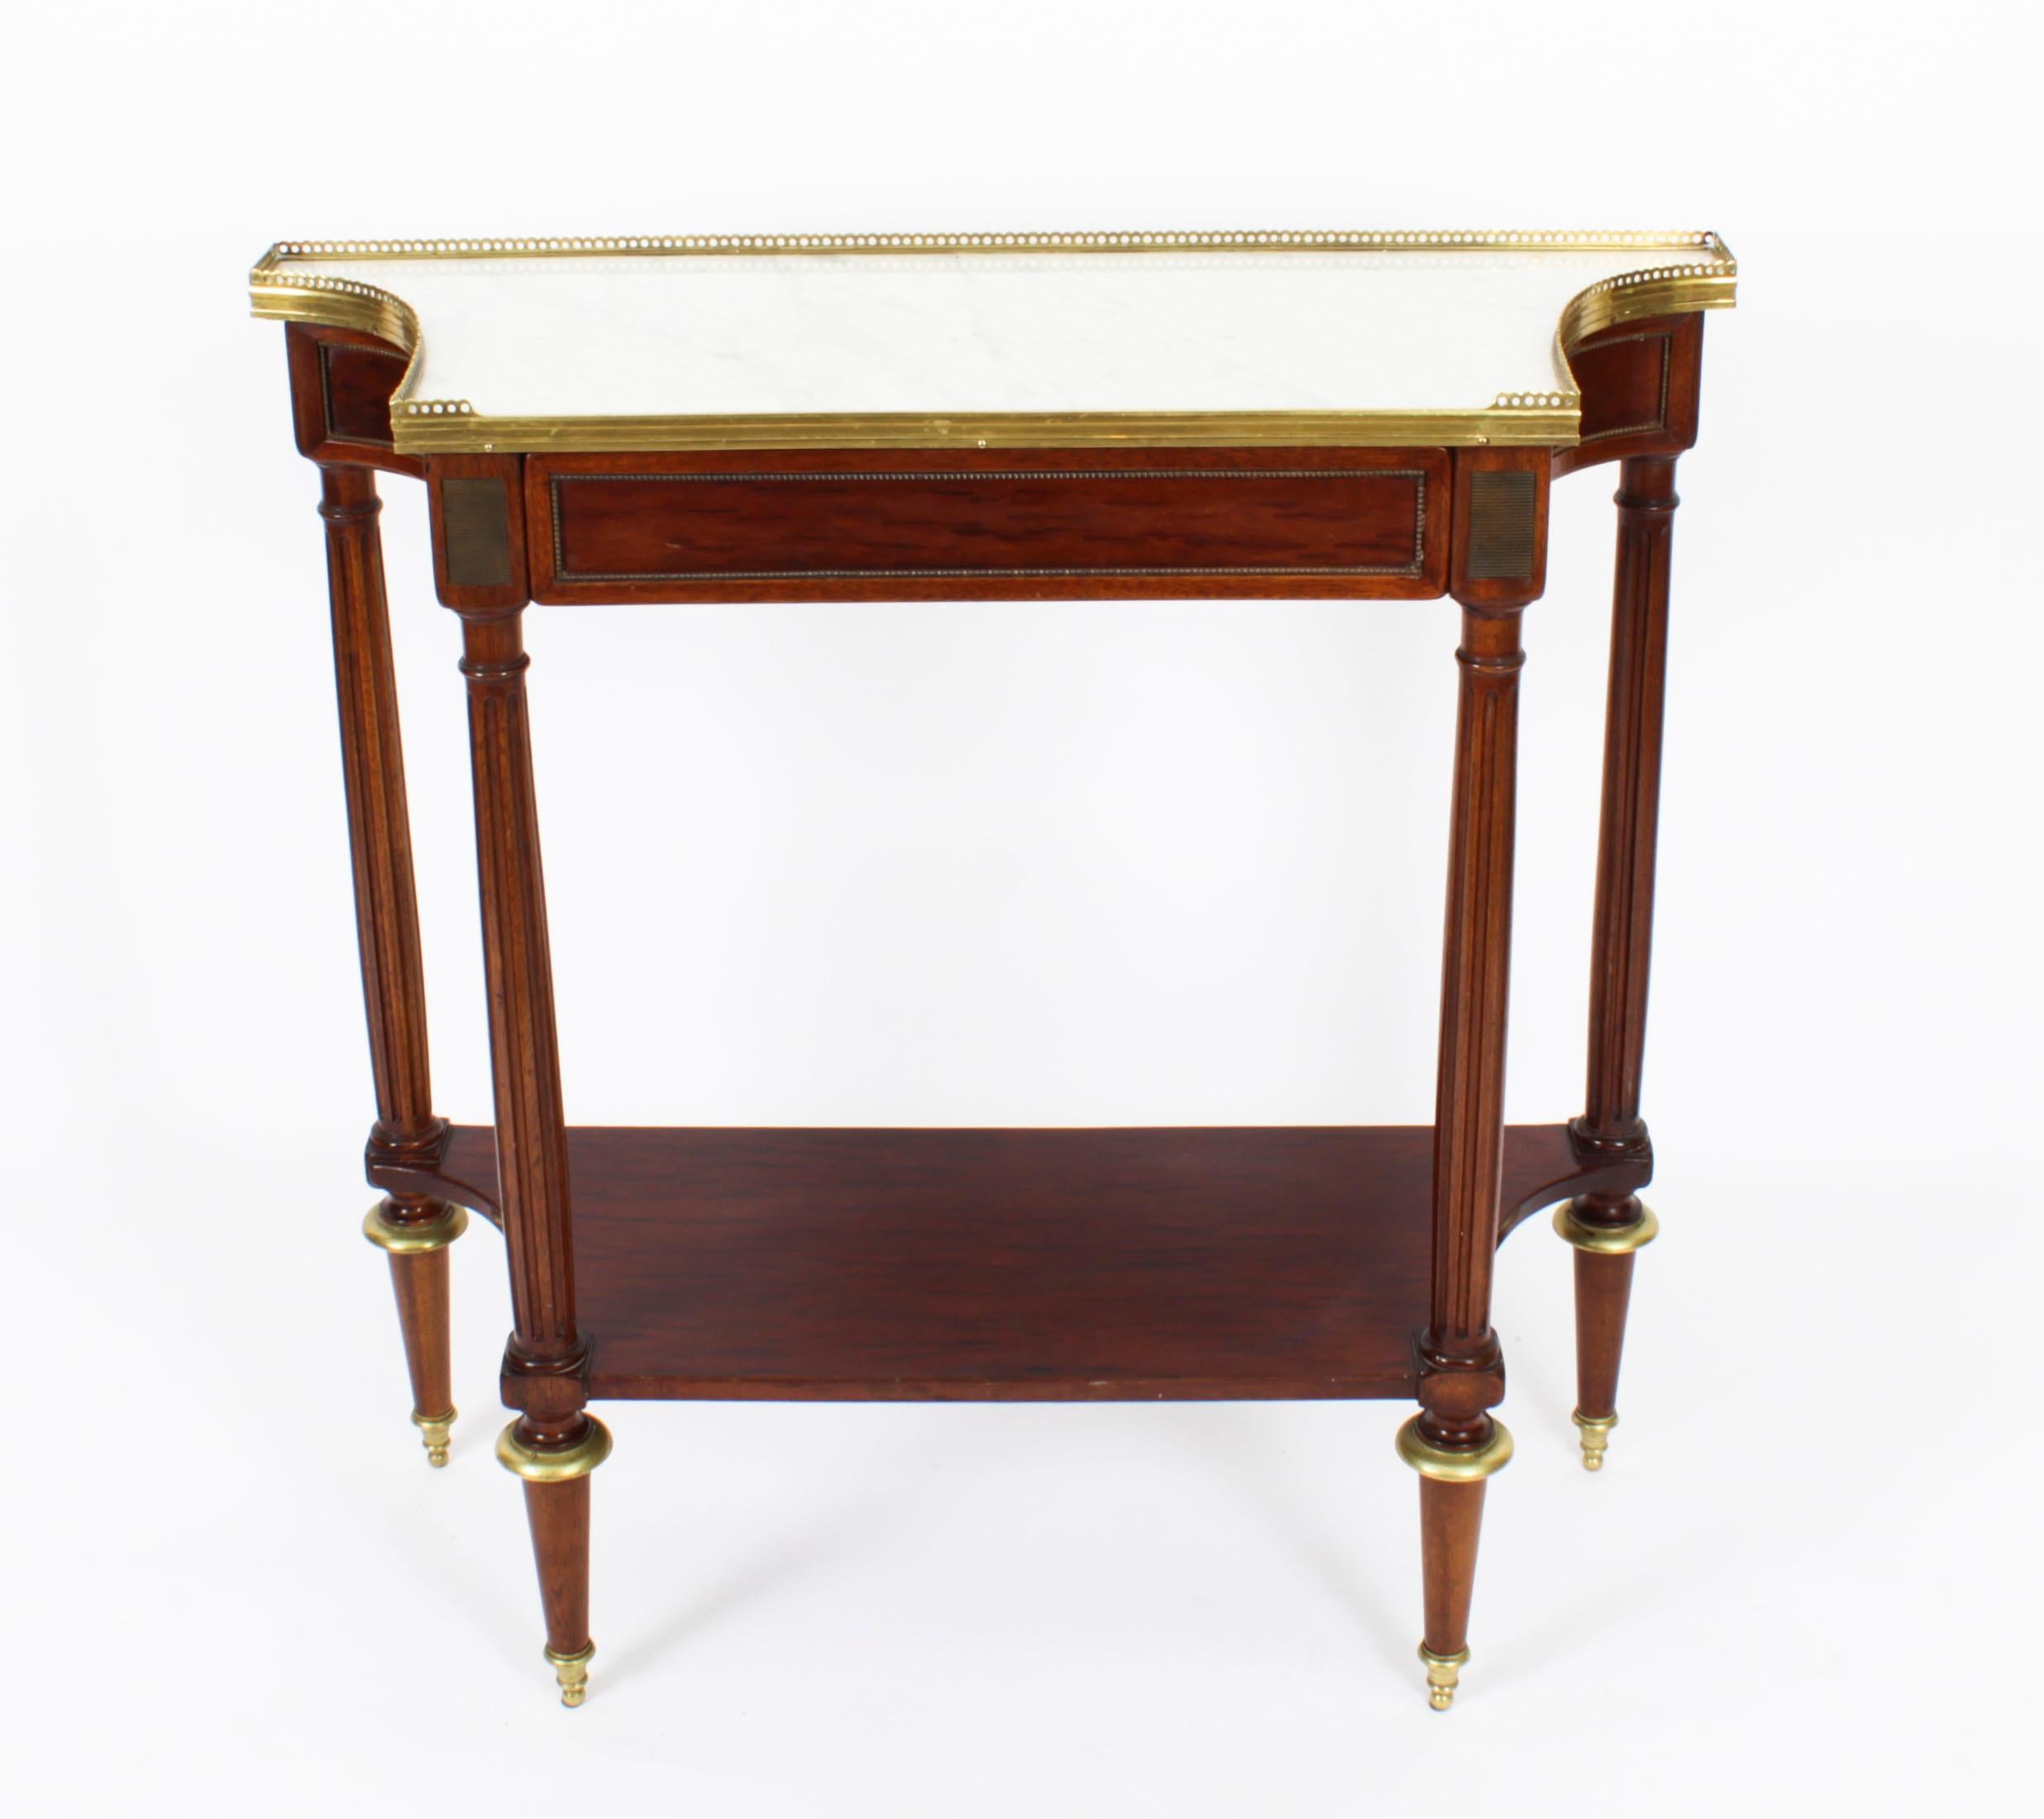 This is a fine antique French Directoire marble topped and ormolu mounted mahogany console table, dating from Circa 1840.
 
The shaped Carrara marble top features a decorative three quarter pieced brass gallery over a frieze drawer decorated with